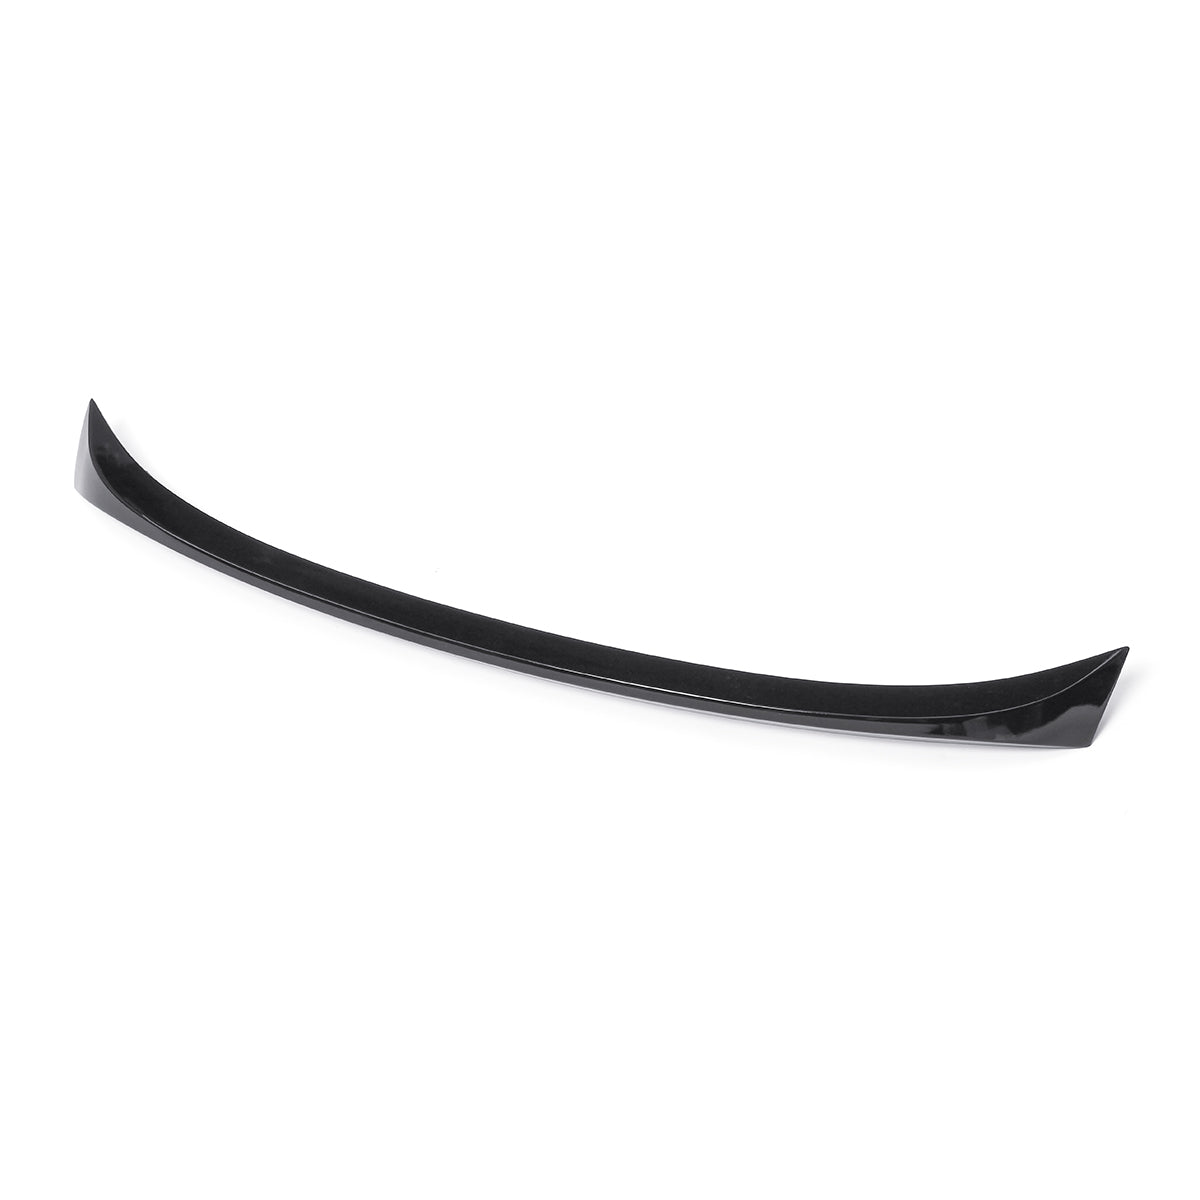 ABS OE Type Rear Trunk Spoiler Wing Painted Glossy Black For BMW E90 3-series Sedan 2005-2011 - Auto GoShop